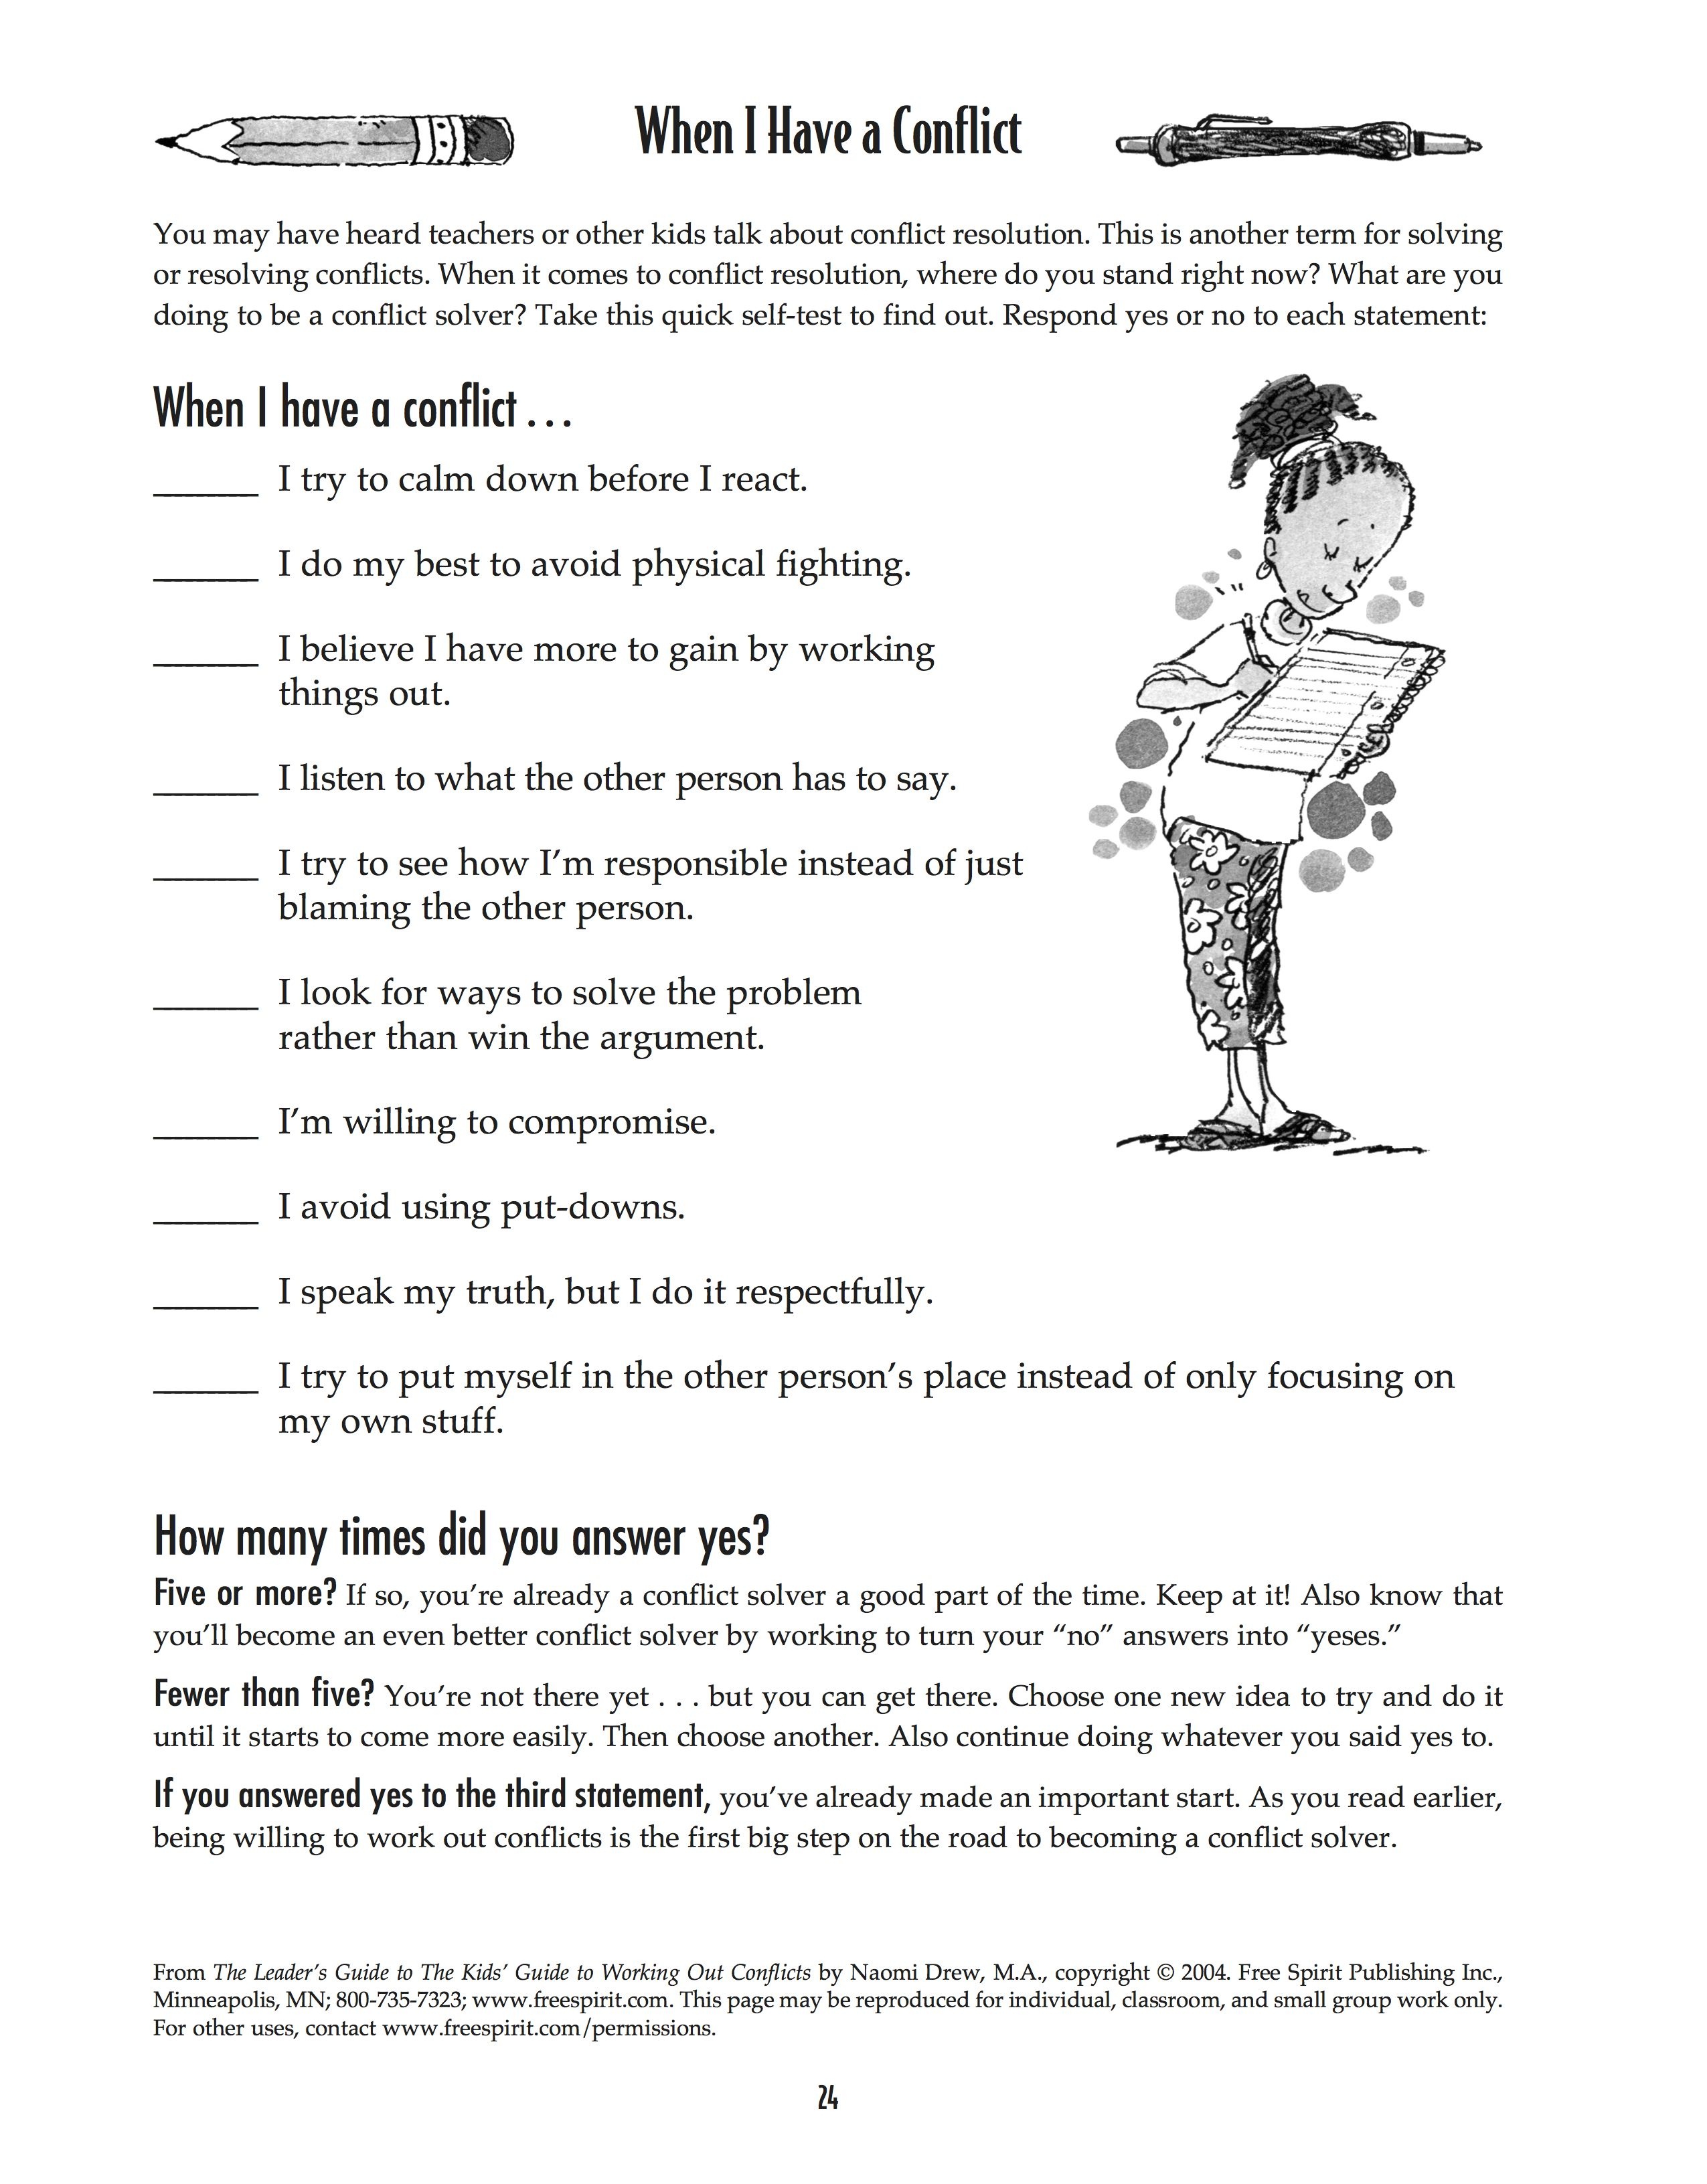 Free Printable Worksheet: When I Have A Conflict. A Quick Self-Test - Free Printable Coping Skills Worksheets For Adults